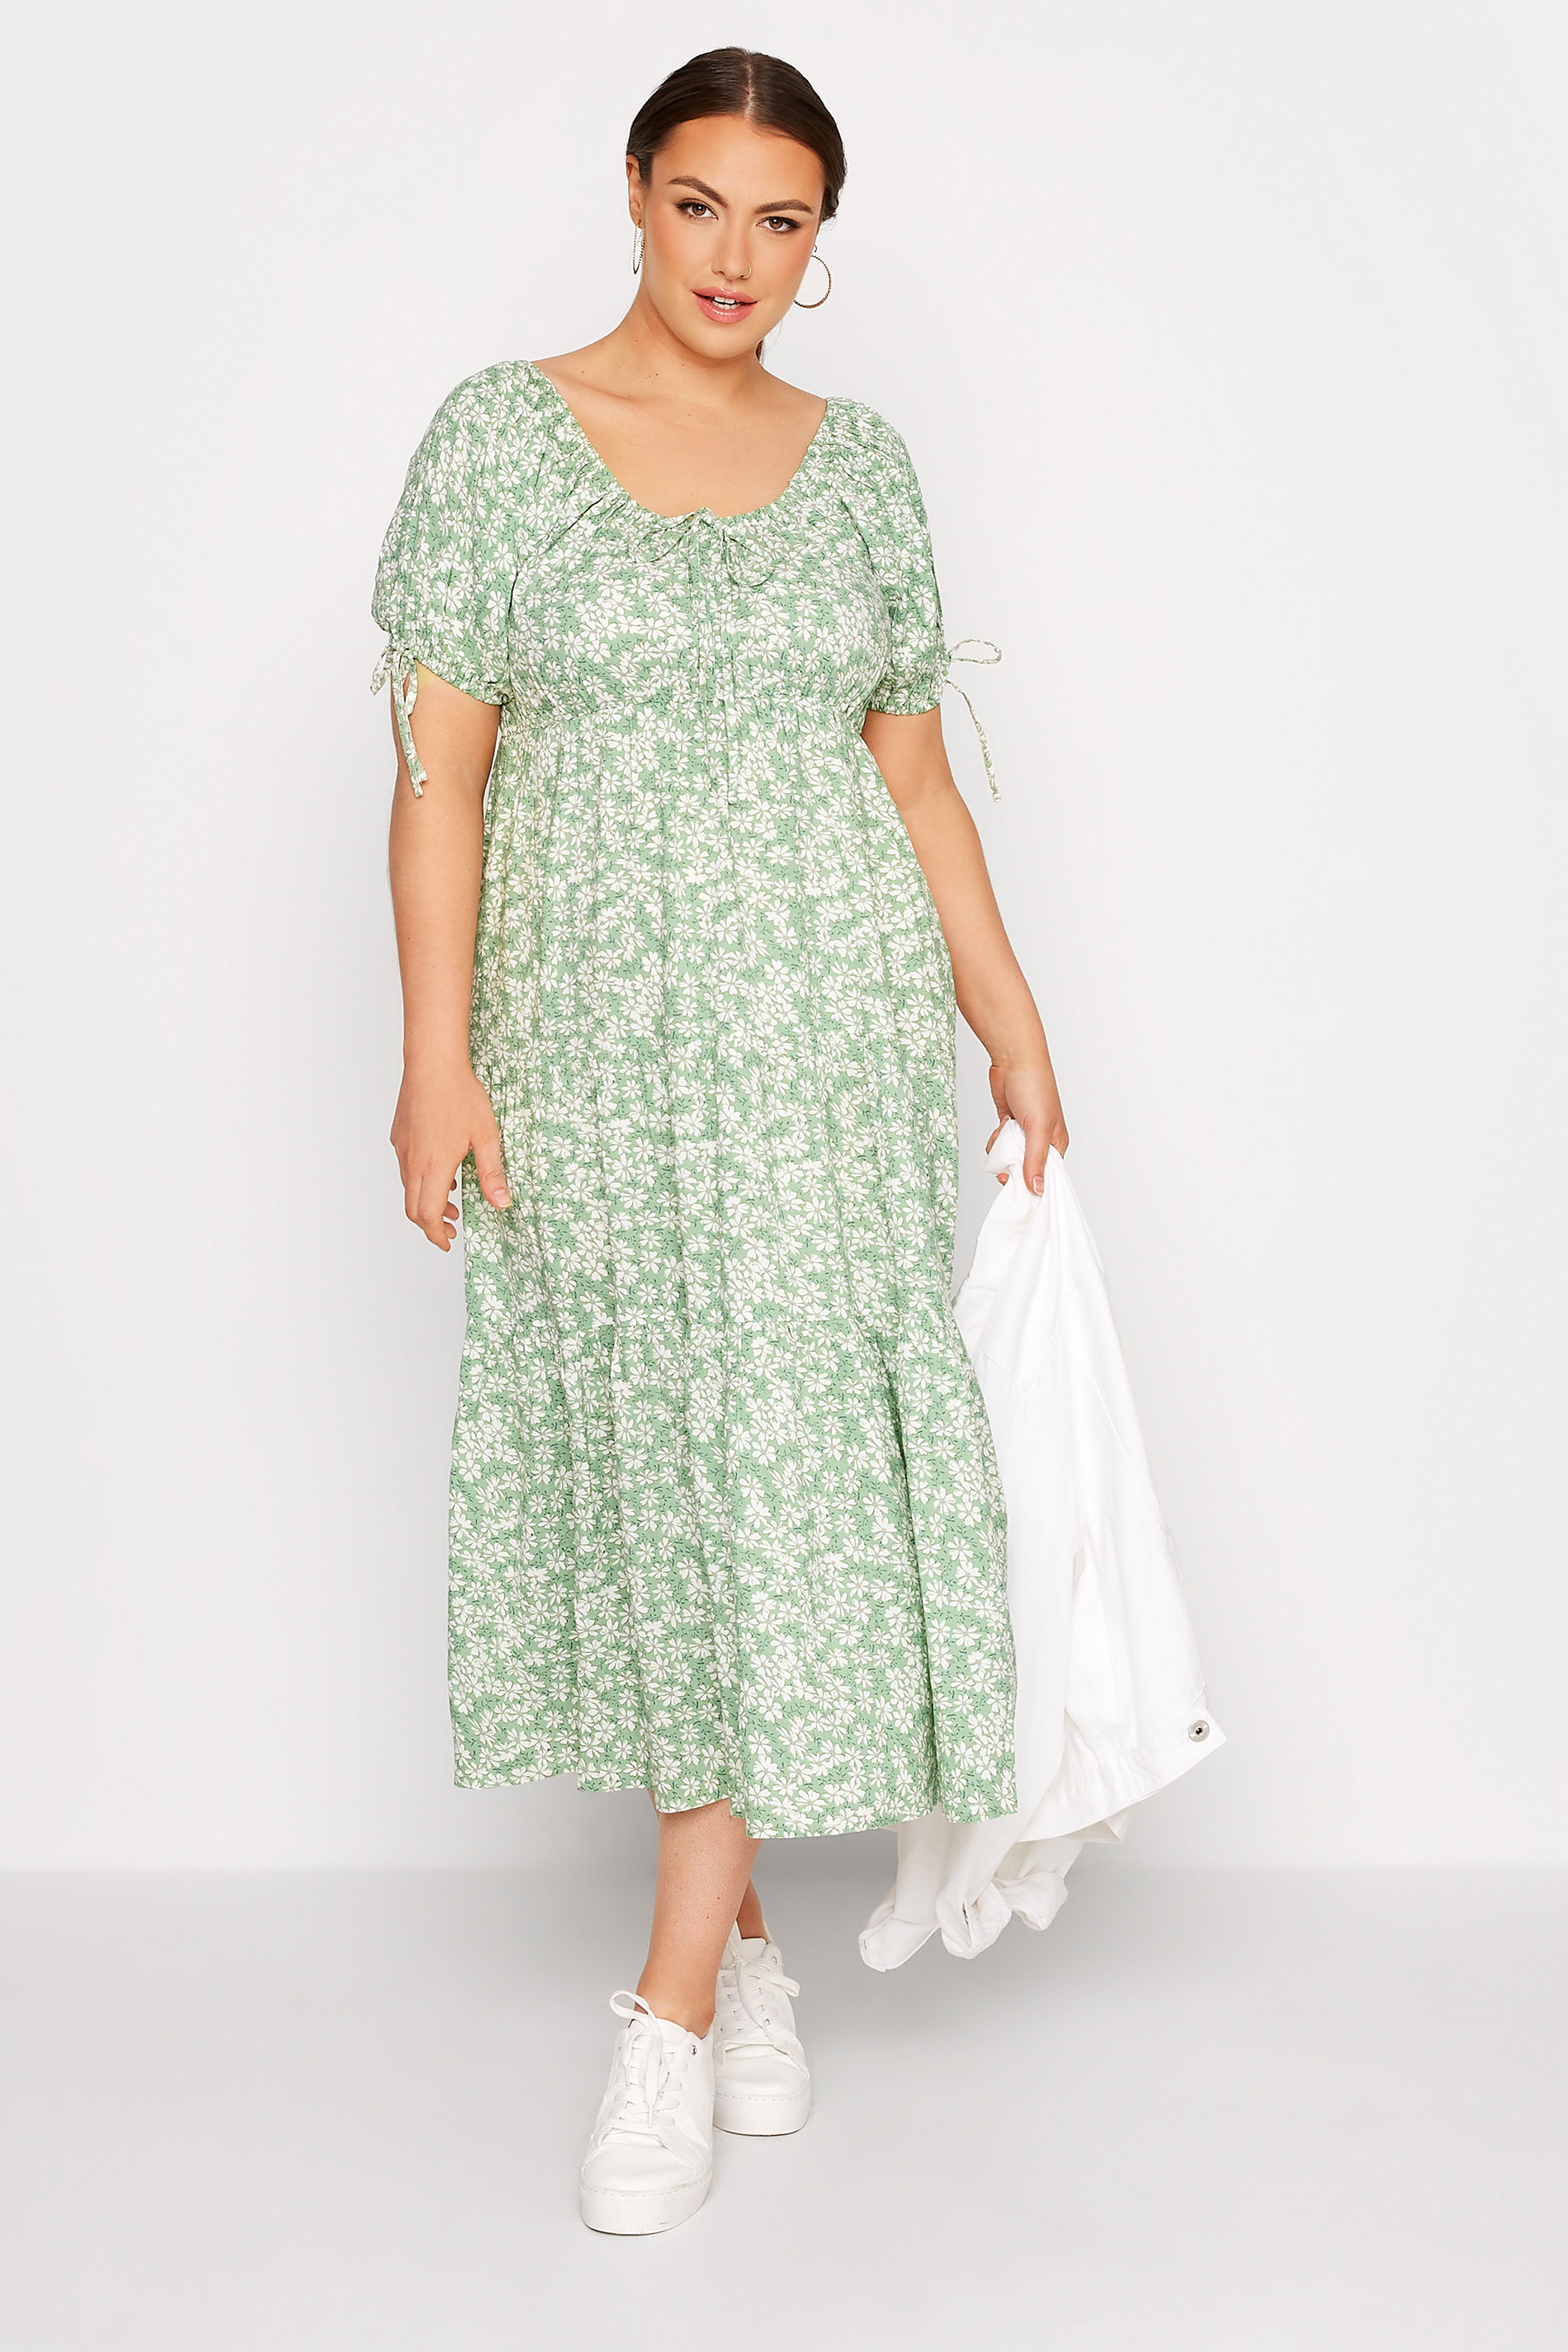 Robes Grande Taille Grande taille  Robes Longues | LIMITED COLLECTION - Robe Verte Pâquerettes Maxi Manches Courtes - LS96109